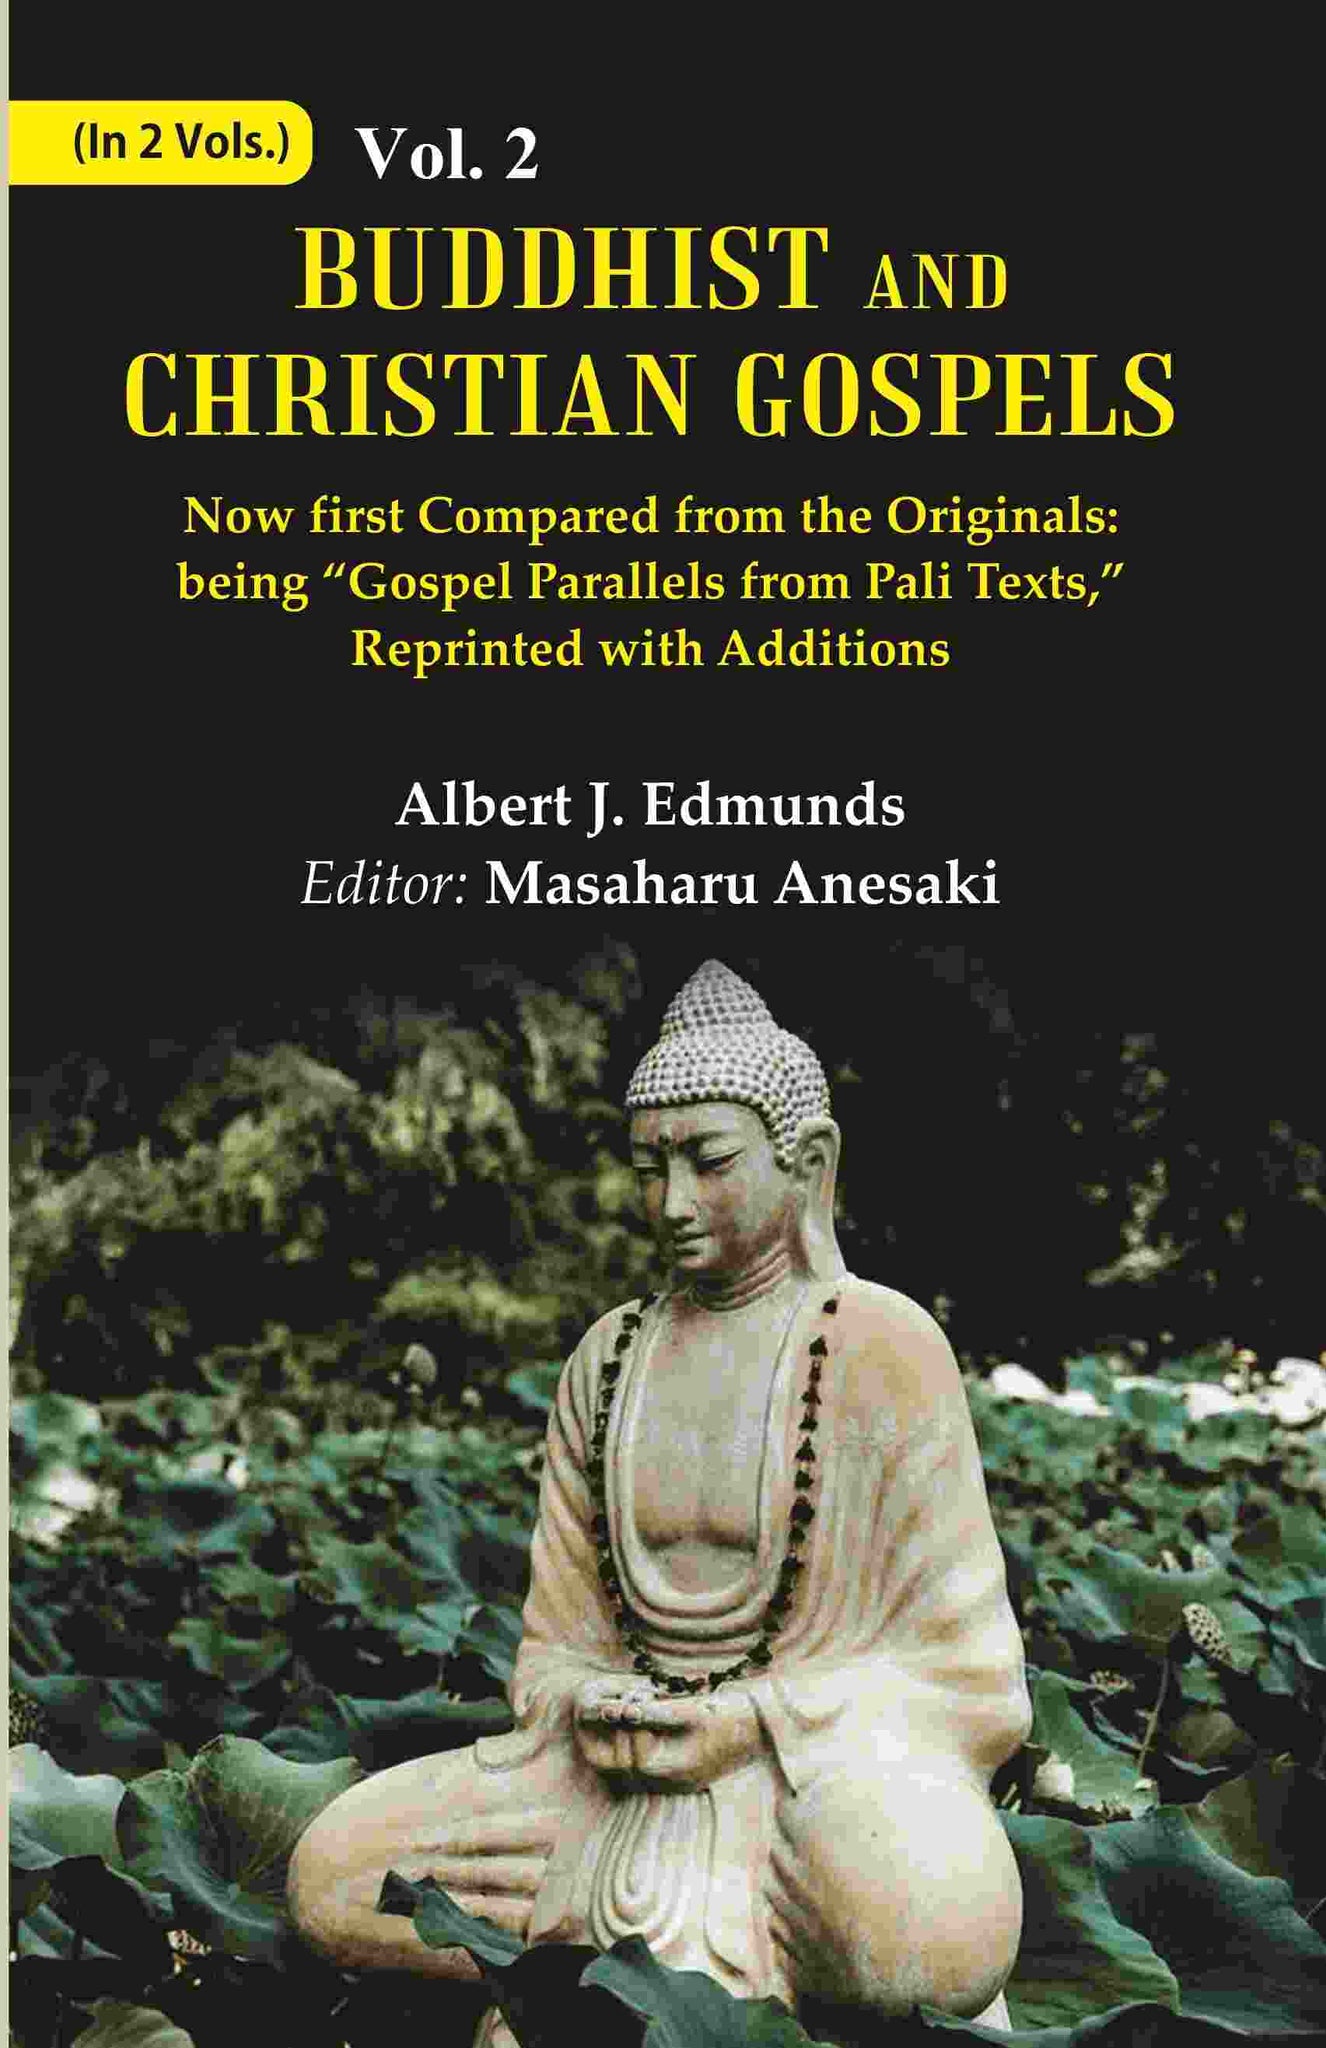 Buddhist and Christian Gospels: Now first Compared from the Originals: being “Gospel Parallels from Pali Texts,” Reprinted with Additions